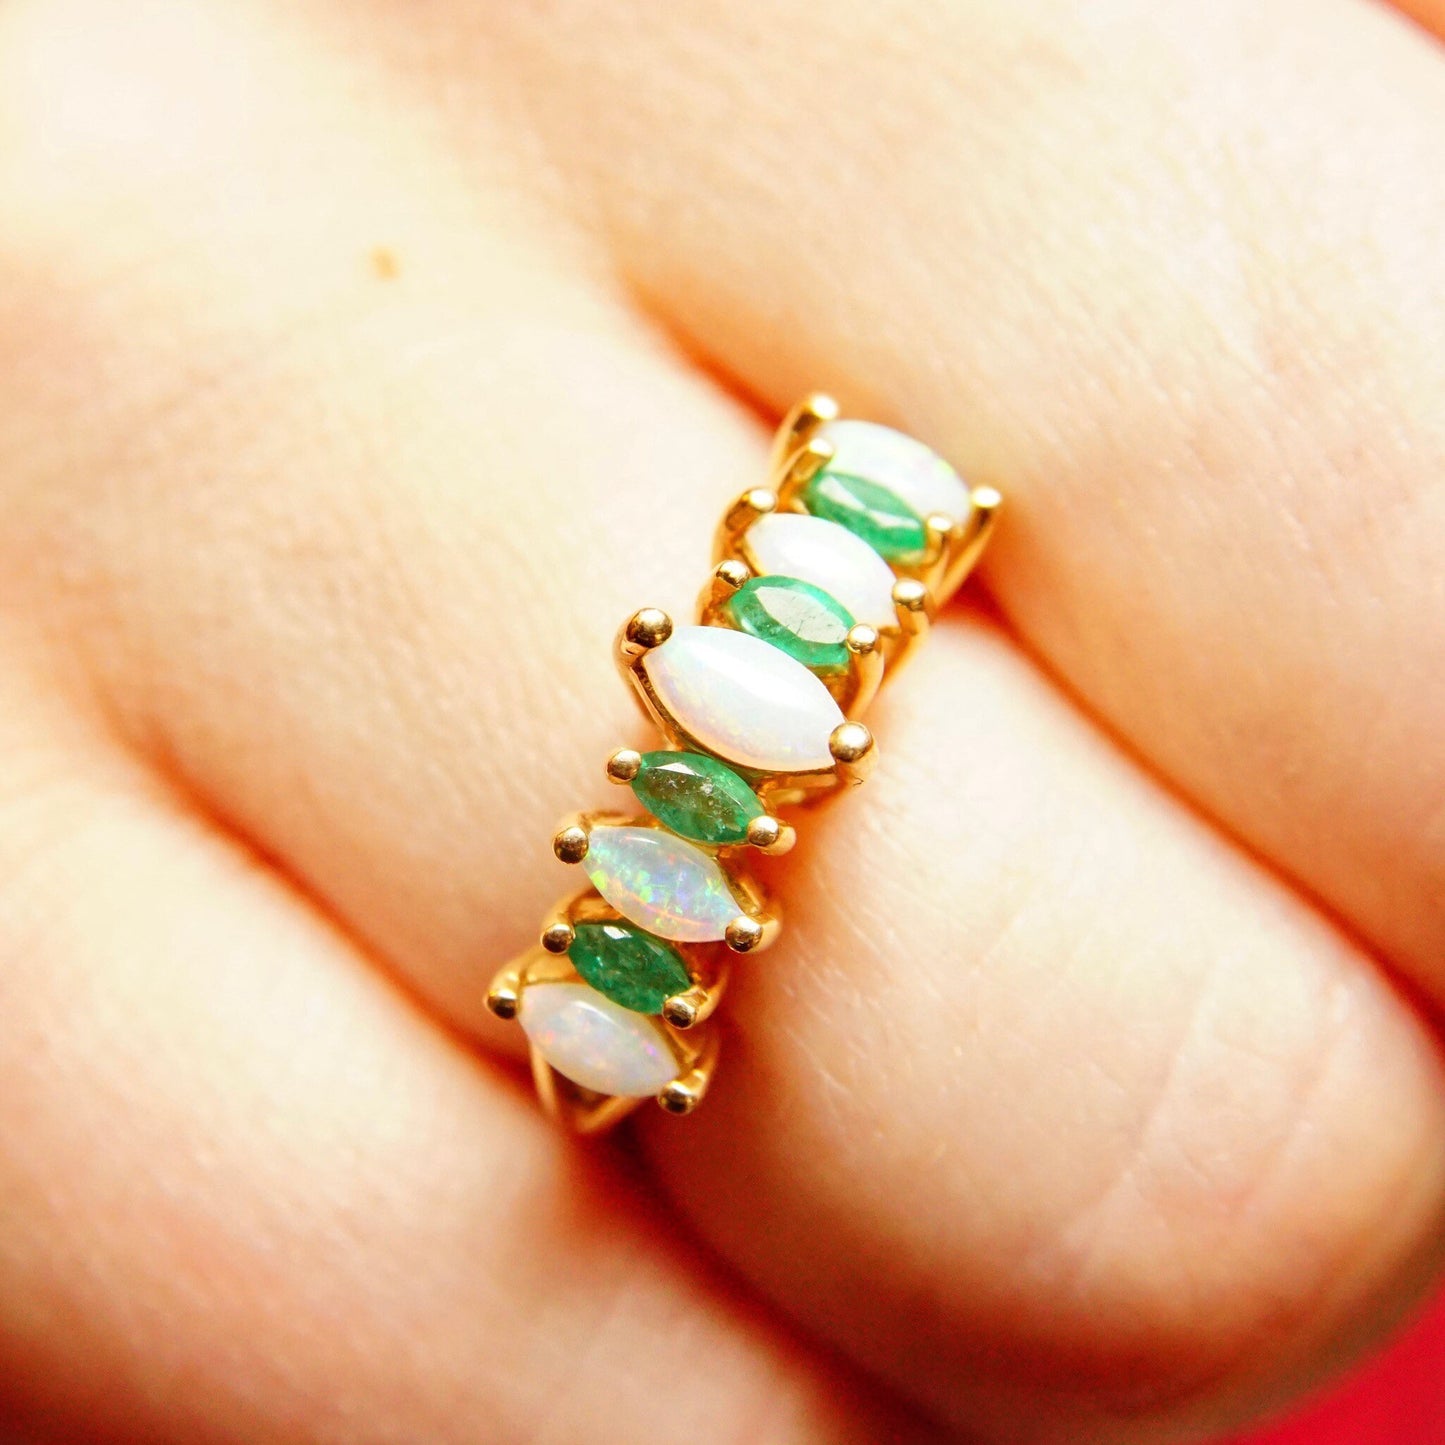 14K Marquise Opal Emerald Eternity Ring, Multi-Stone Cluster Cocktail Ring, Estate Jewelry, Size 6 1/4 US